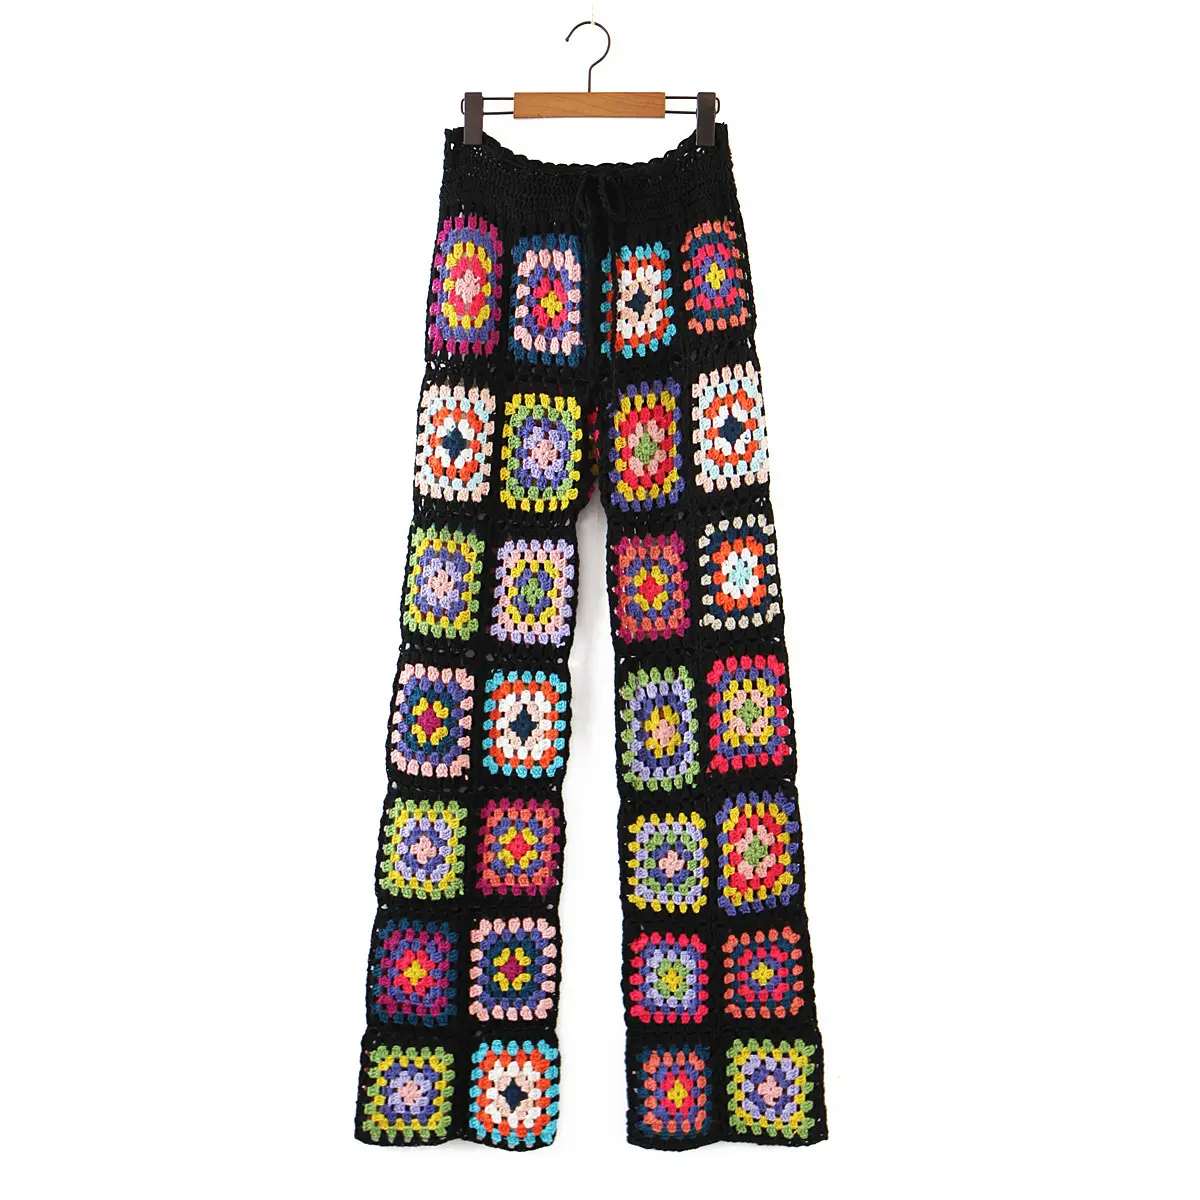 KaiChen Vintage Summer Spring New Fashion Colorful Patchwork Pattern Floral Knitting Crochet Pants Women Trousers Casual Pants